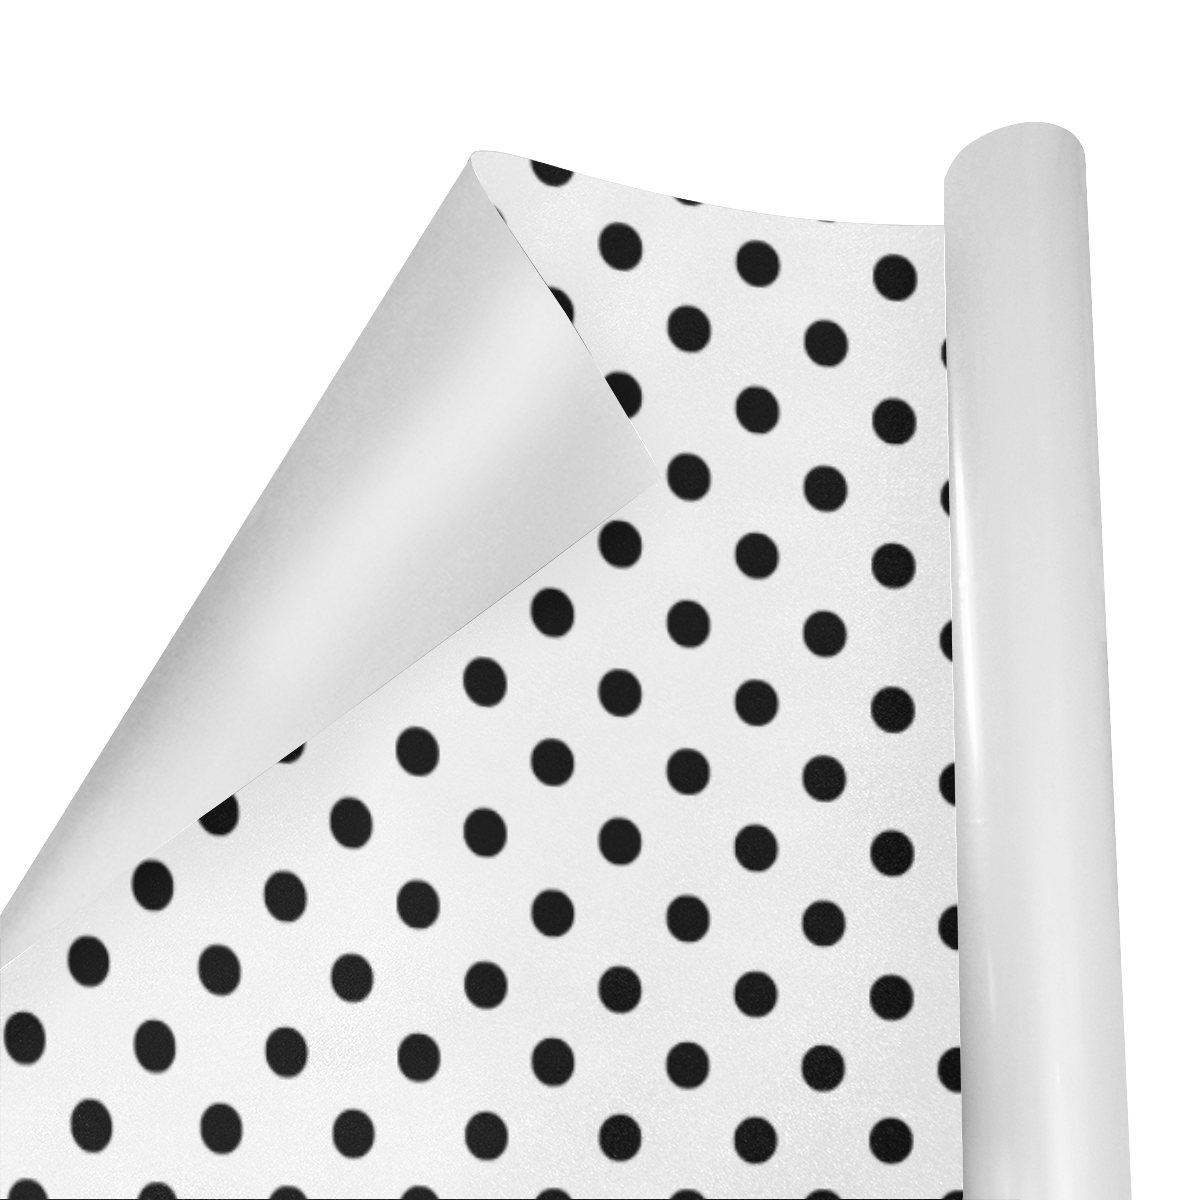 Black Polka Dots on White Gift Wrapping Paper 58"x 23" (3 Rolls)